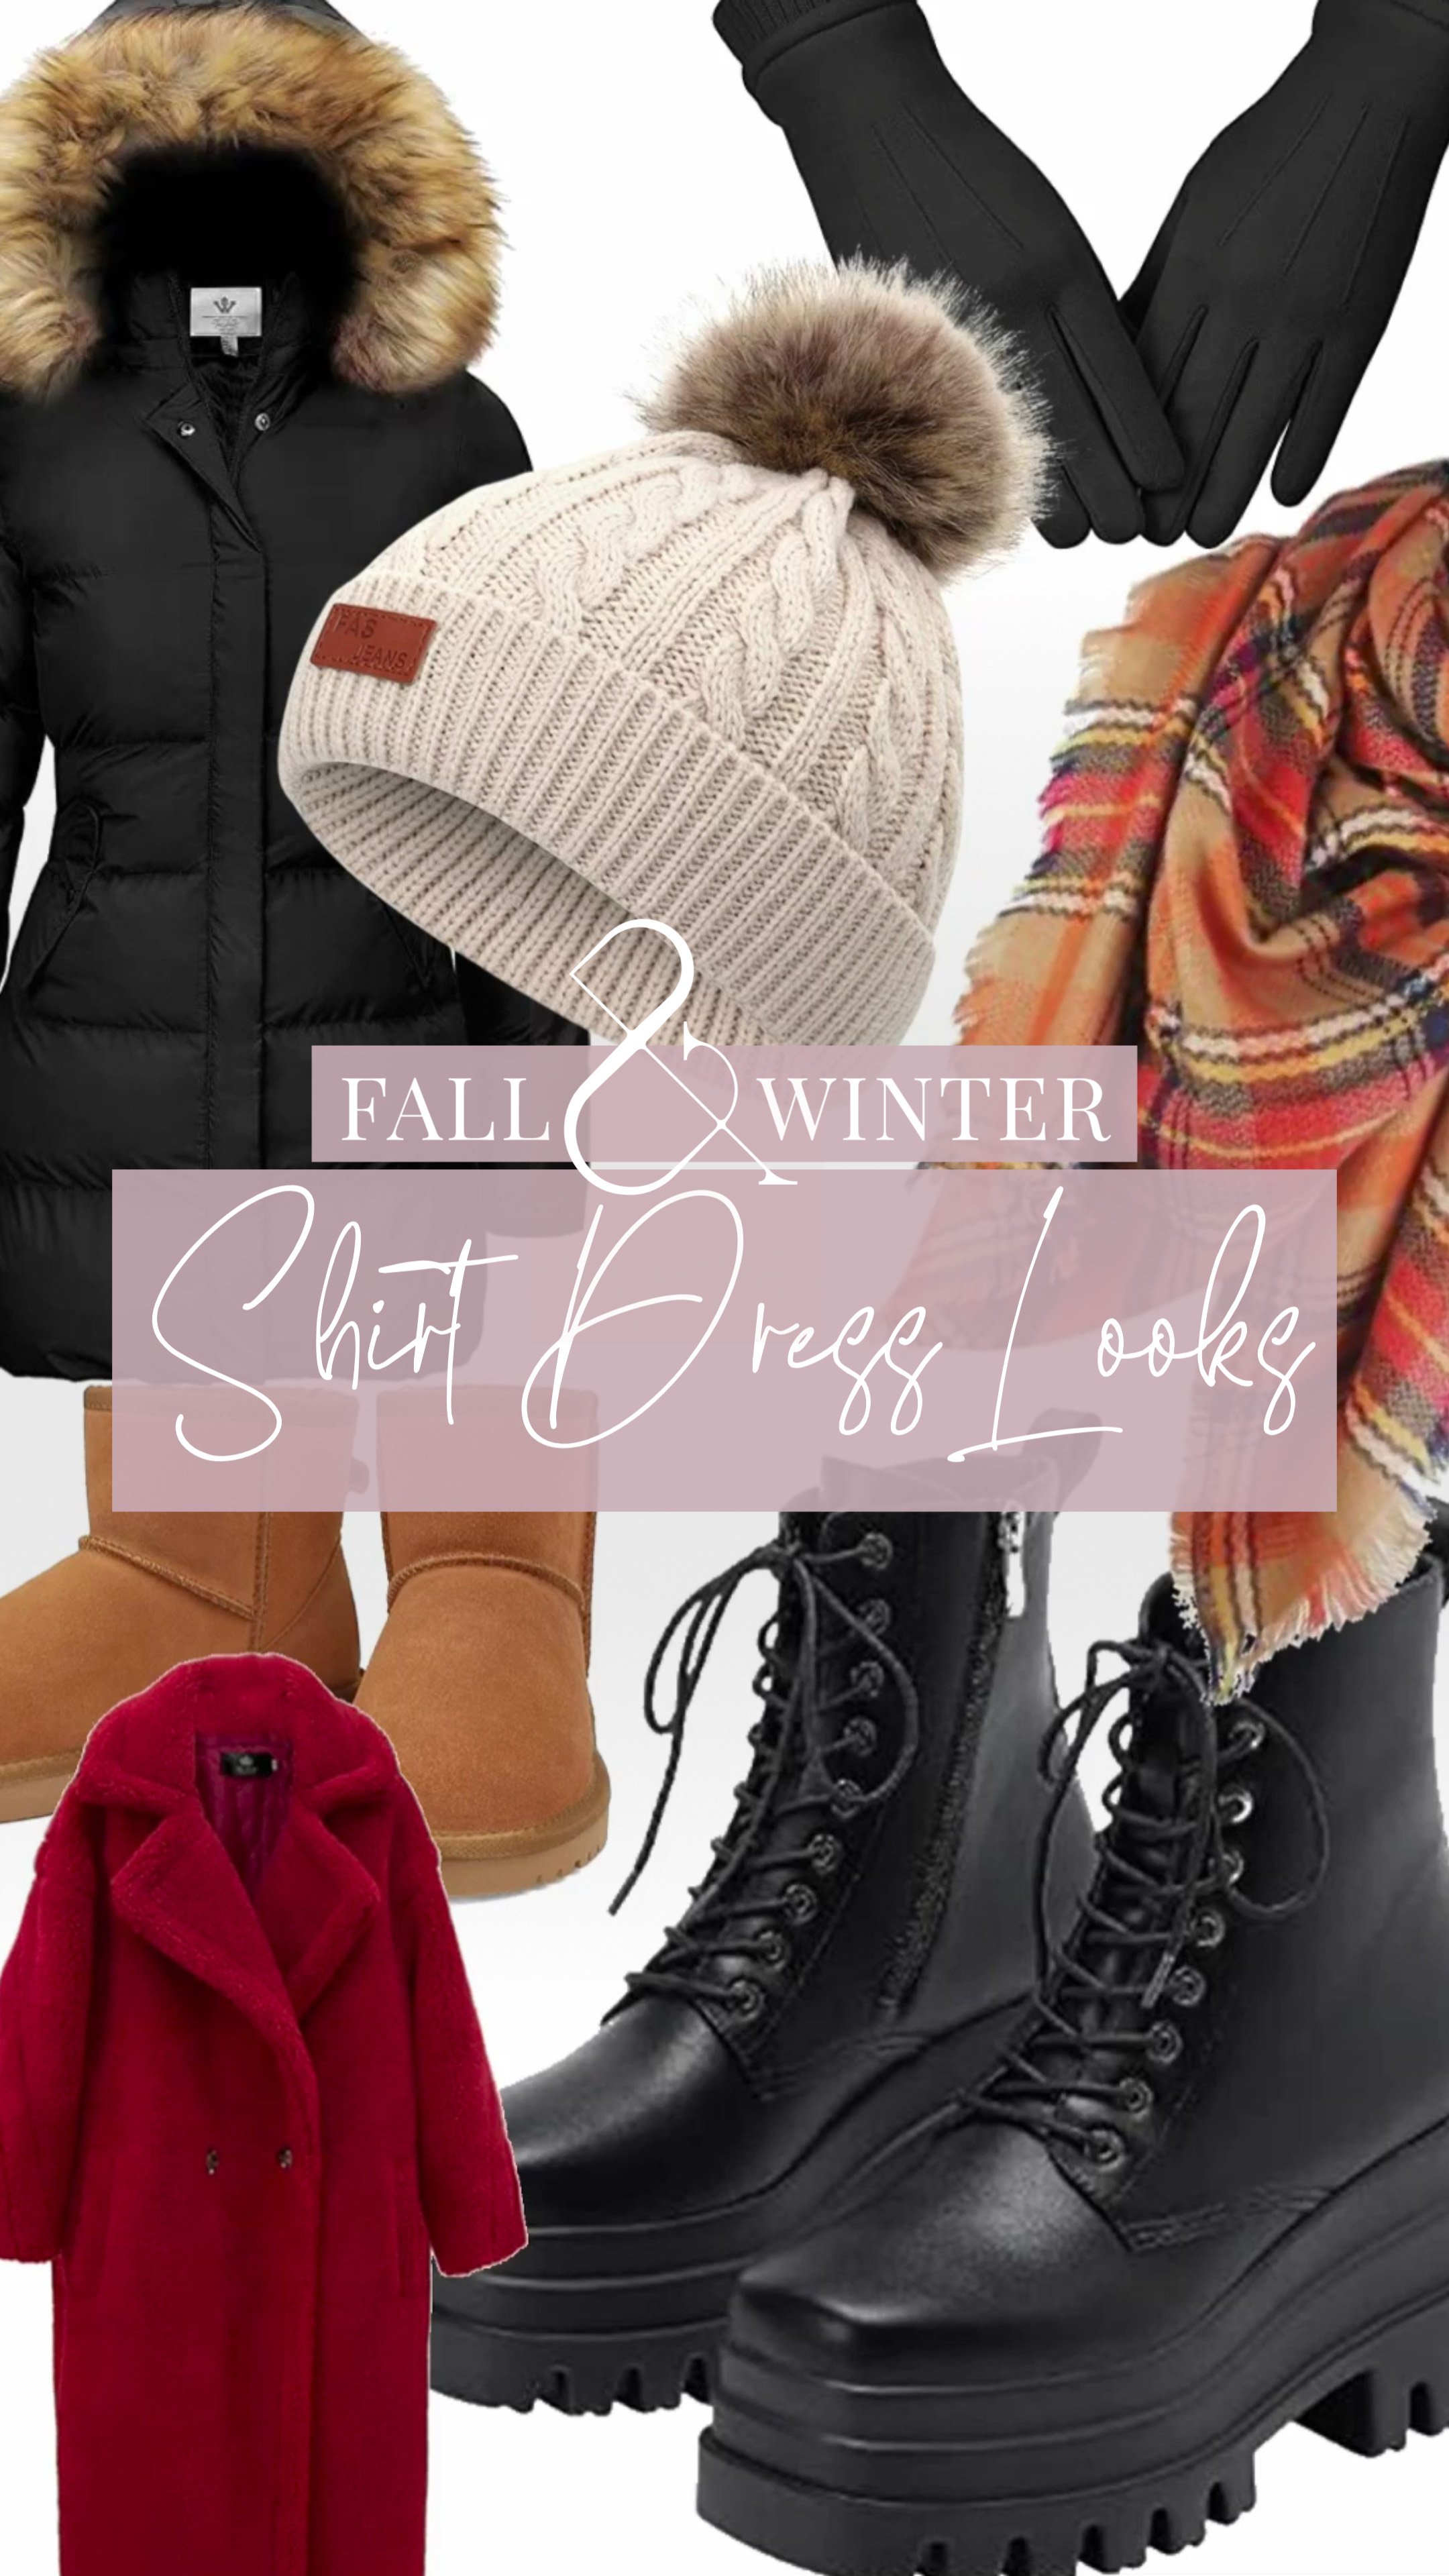 WHAT MAKES YOUR LOOK HAVE FALL/ WINTER VIBES!?